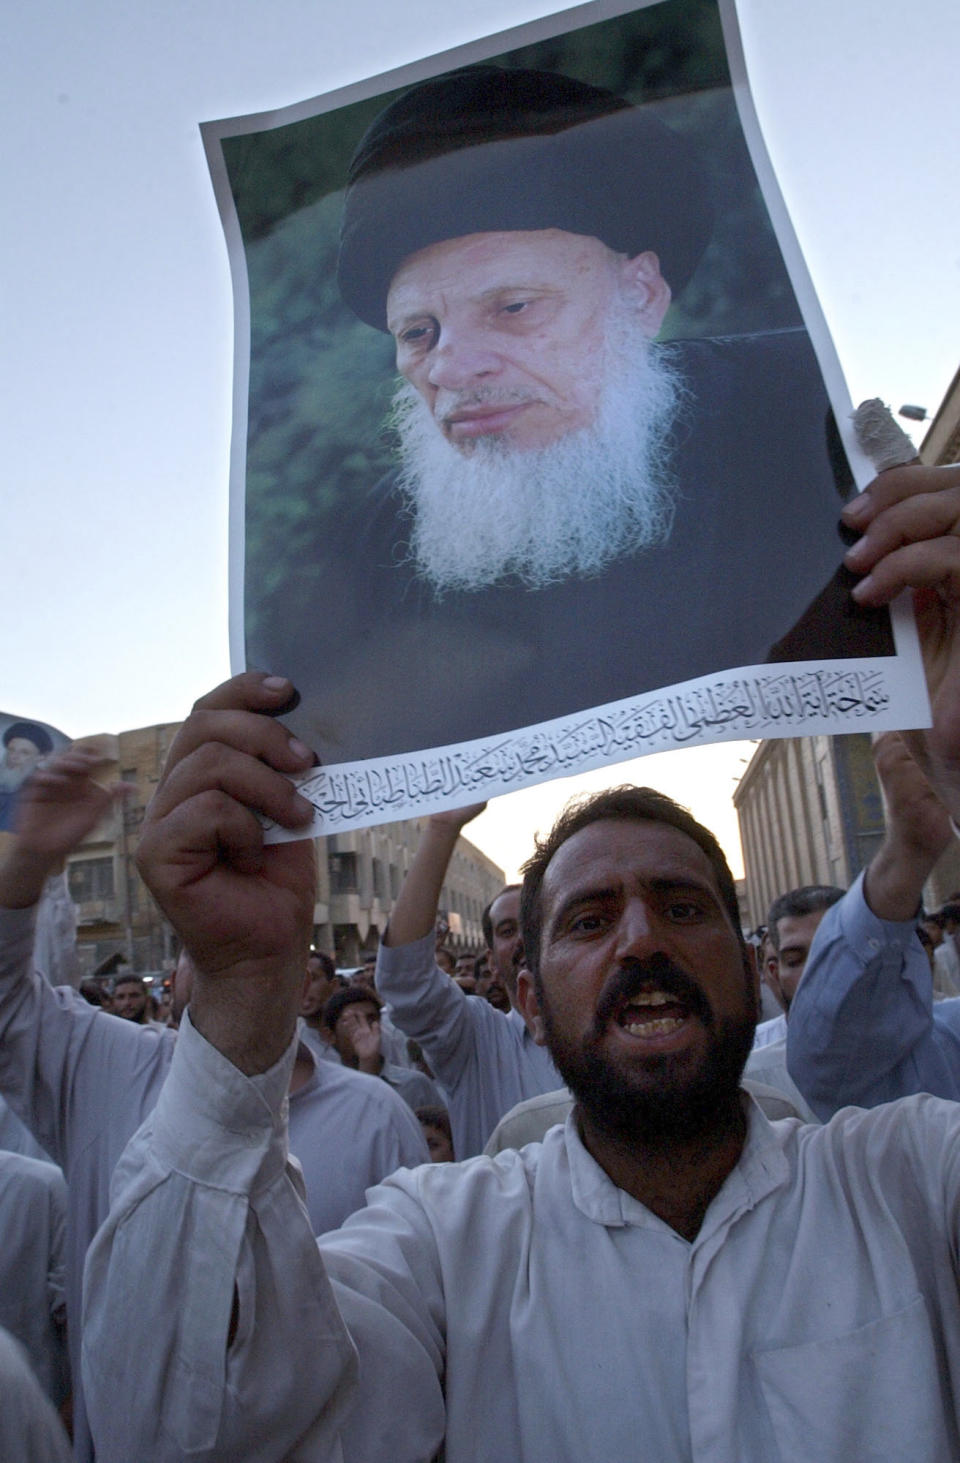 File -In this Sunday, Aug. 24, 2003 file photo, Iraqi Shiites protest an attack on Mohammed Saeed al-Hakim, one of Iraq's most influential Muslim Shiite clerics, in the holy city of Najaf. l-Hakim, one of Iraq's most senior and influential Muslim Shiite clerics, has died, members of his family said. He was 85. (AP Photo/Samir Mezban, File)